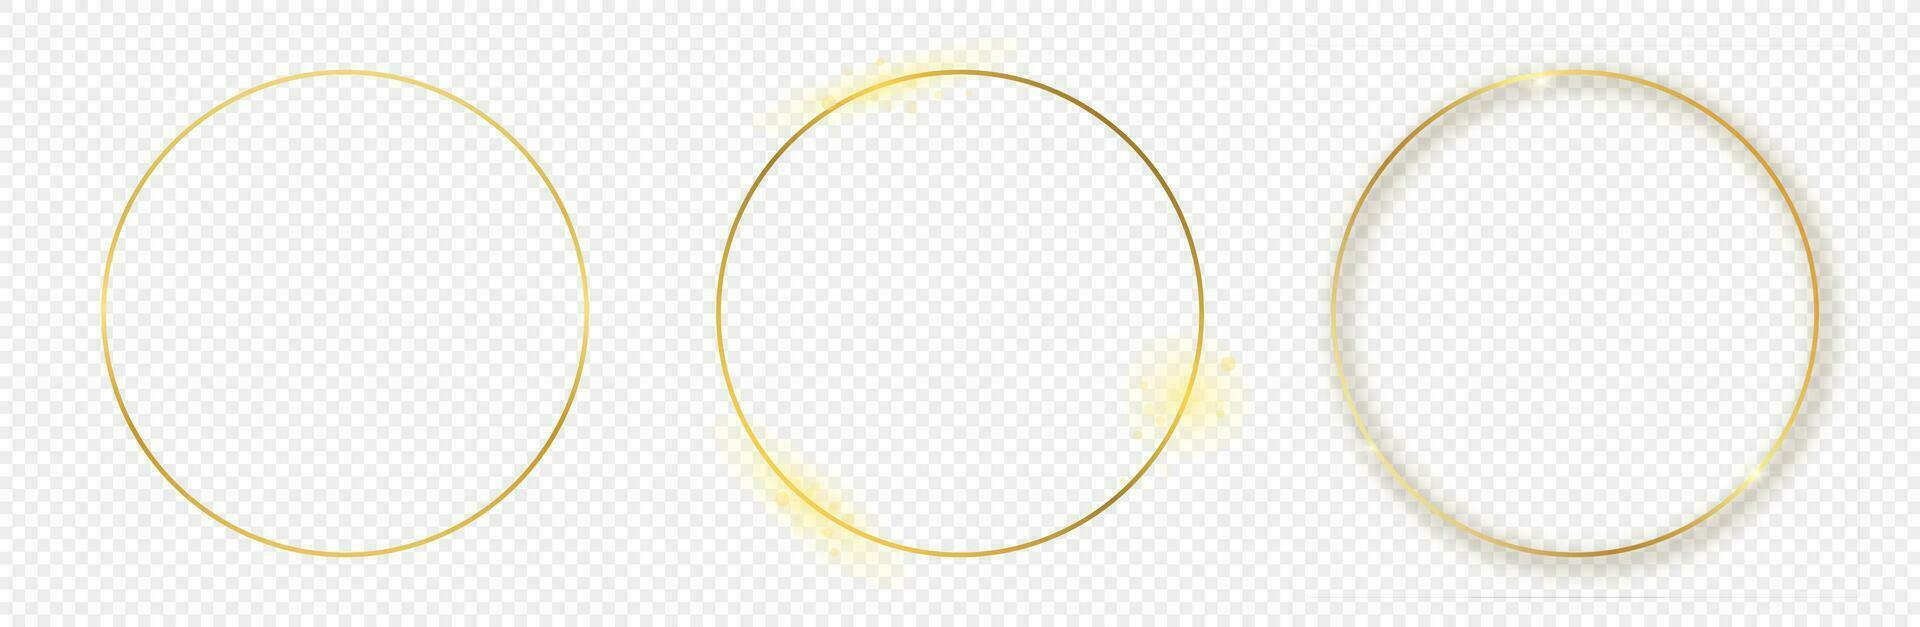 Set of three gold glowing circle frames isolated on background. Shiny frame with glowing effects. Vector illustration.